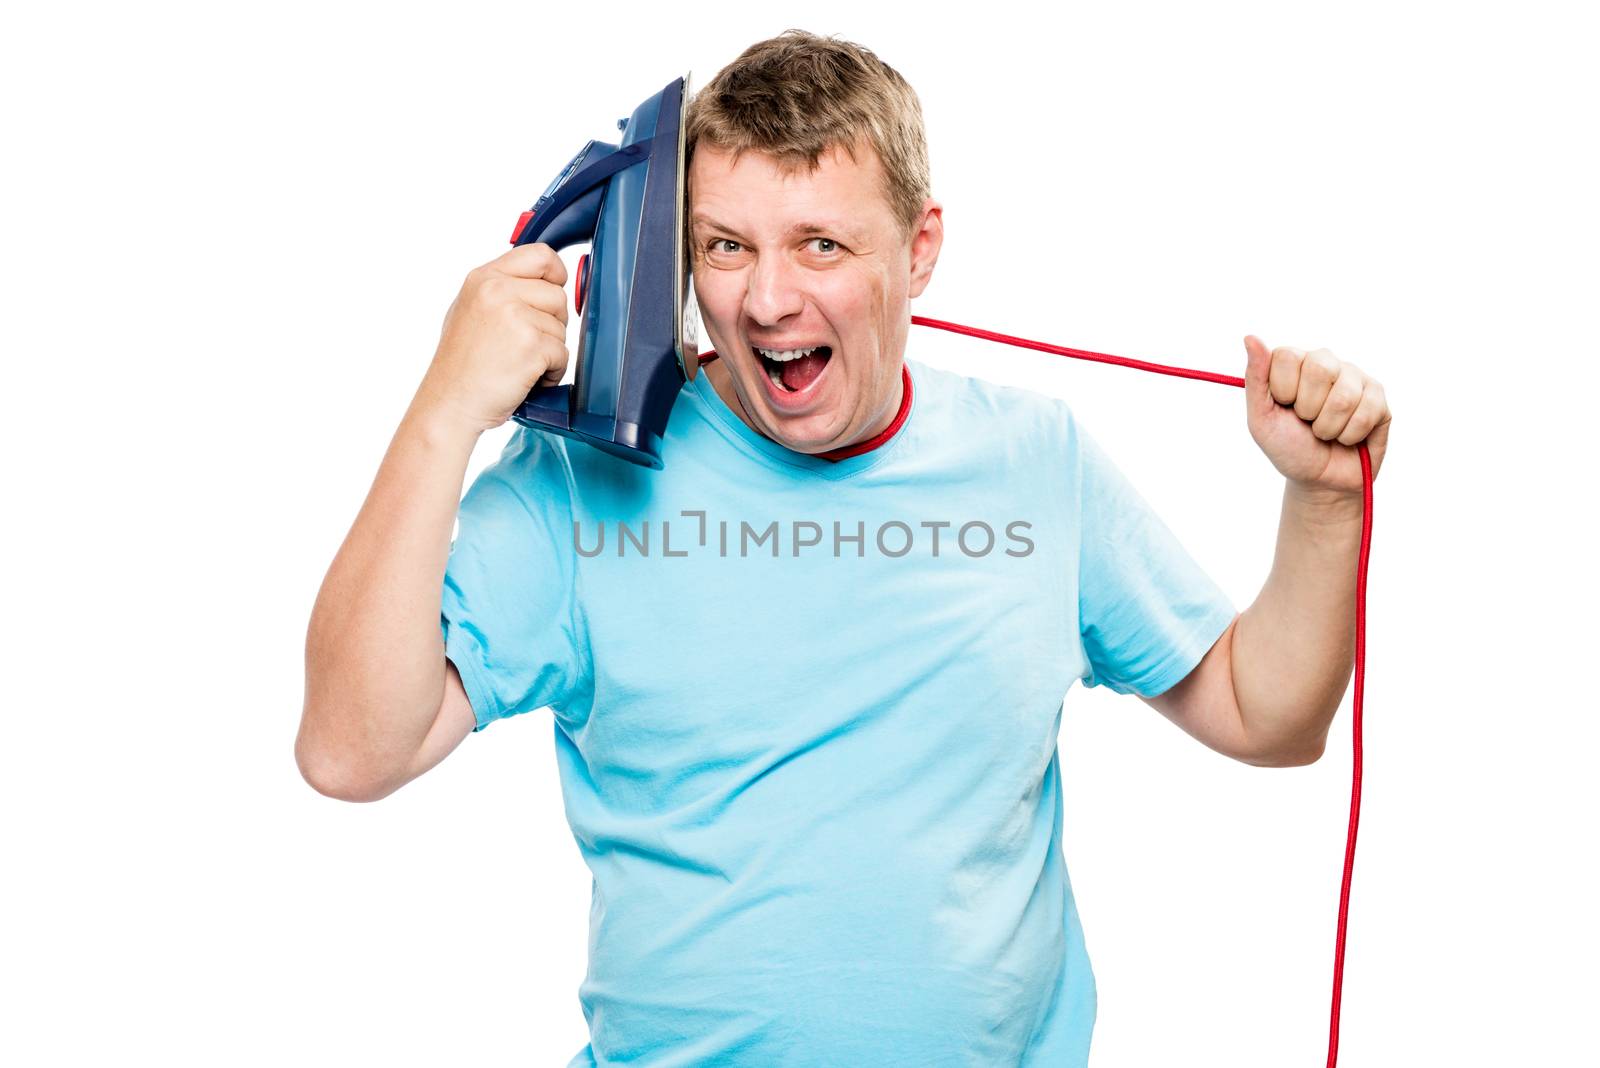 concept photography - crazy man smothering himself with a wire from an iron on a white background